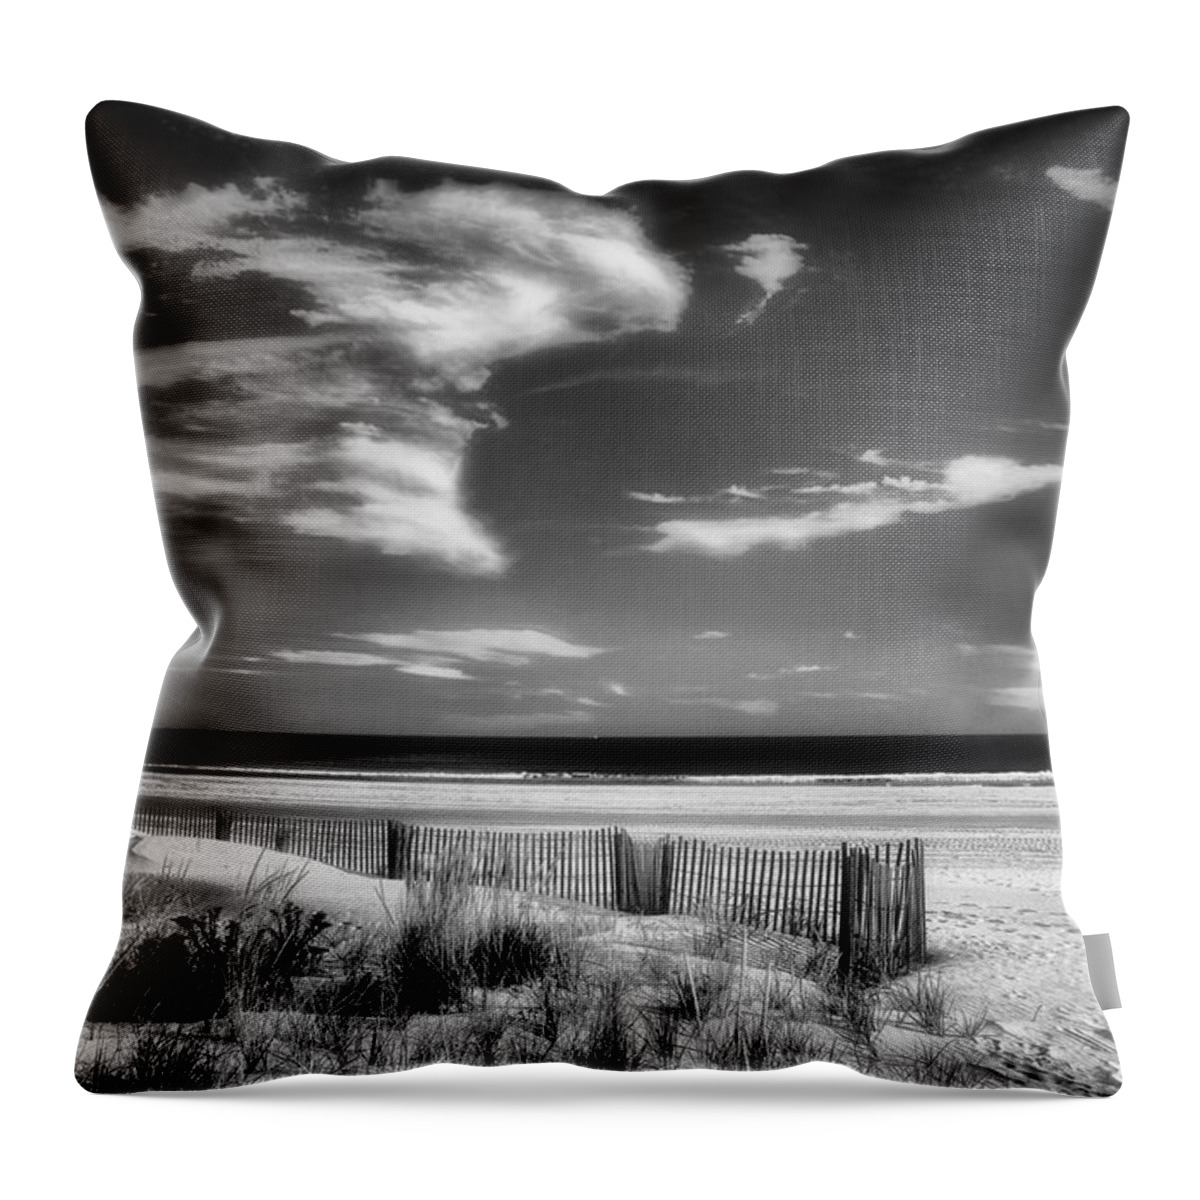 Seascape In Black And White Throw Pillow featuring the photograph Seascape in Black and White by Carolyn Derstine